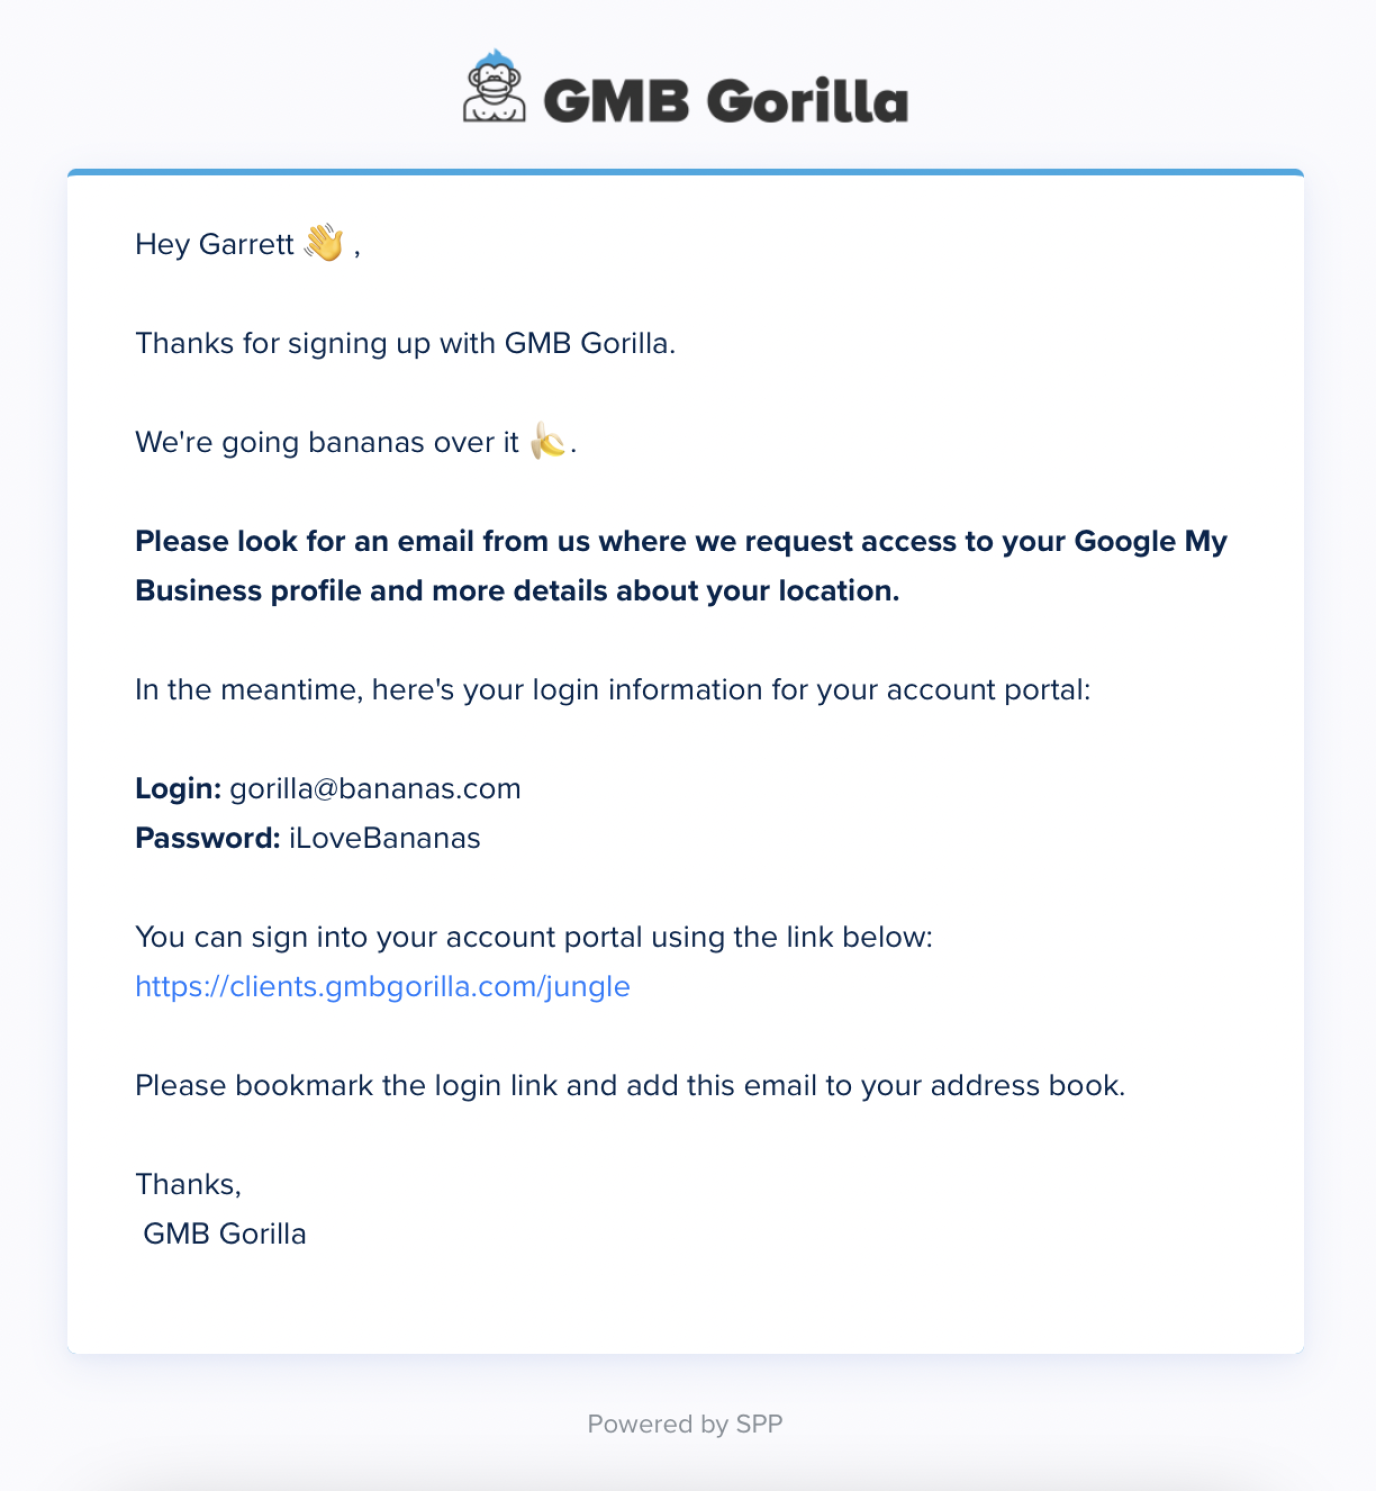 GMB Gorilla welcome email